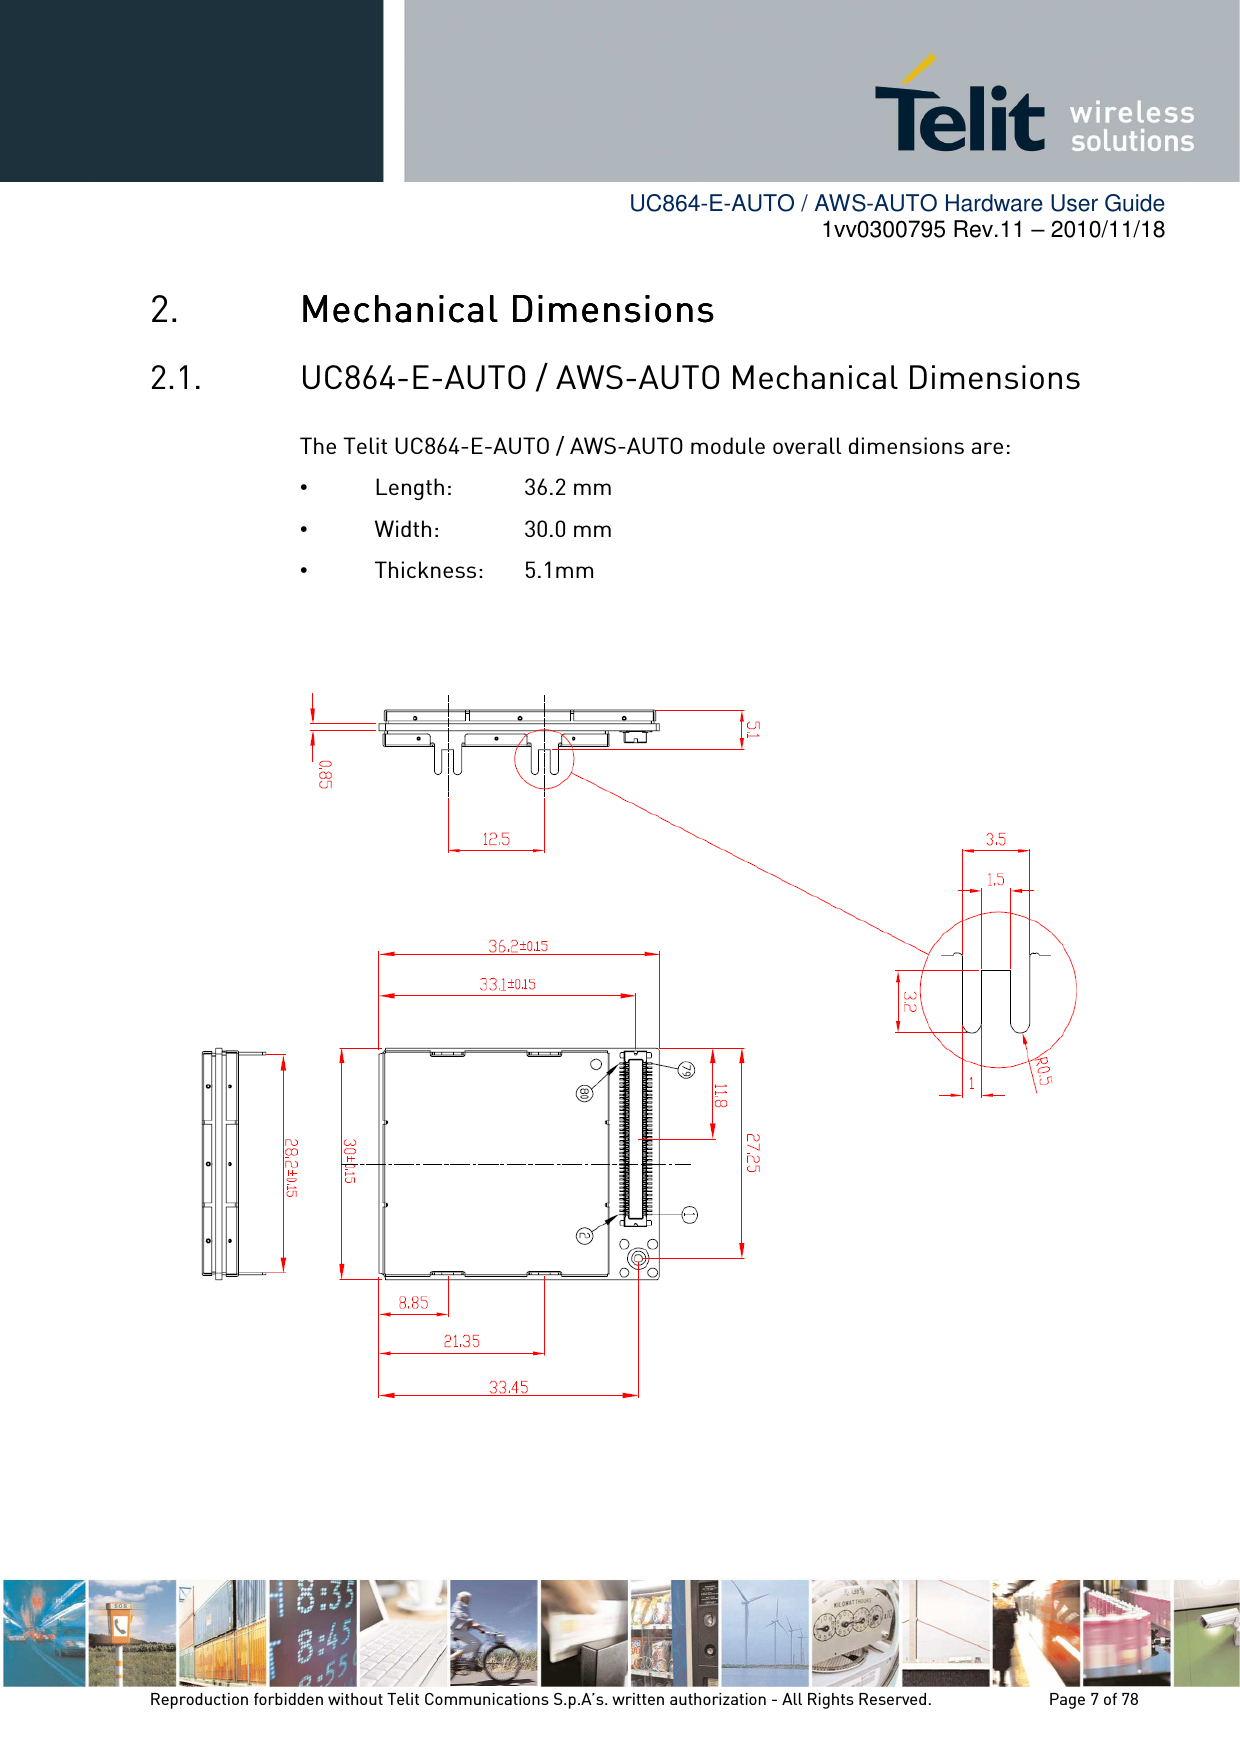        UC864-E-AUTO / AWS-AUTO Hardware User Guide 1vv0300795 Rev.11 – 2010/11/18     Reproduction forbidden without Telit Communications S.p.A’s. written authorization - All Rights Reserved.    Page 7 of 78  2. Mechanical DimensionsMechanical DimensionsMechanical DimensionsMechanical Dimensions    2.1. UC864-E-AUTO / AWS-AUTO Mechanical Dimensions The Telit UC864-E-AUTO / AWS-AUTO module overall dimensions are:  •  Length:   36.2 mm •  Width:    30.0 mm •  Thickness:   5.1mm     